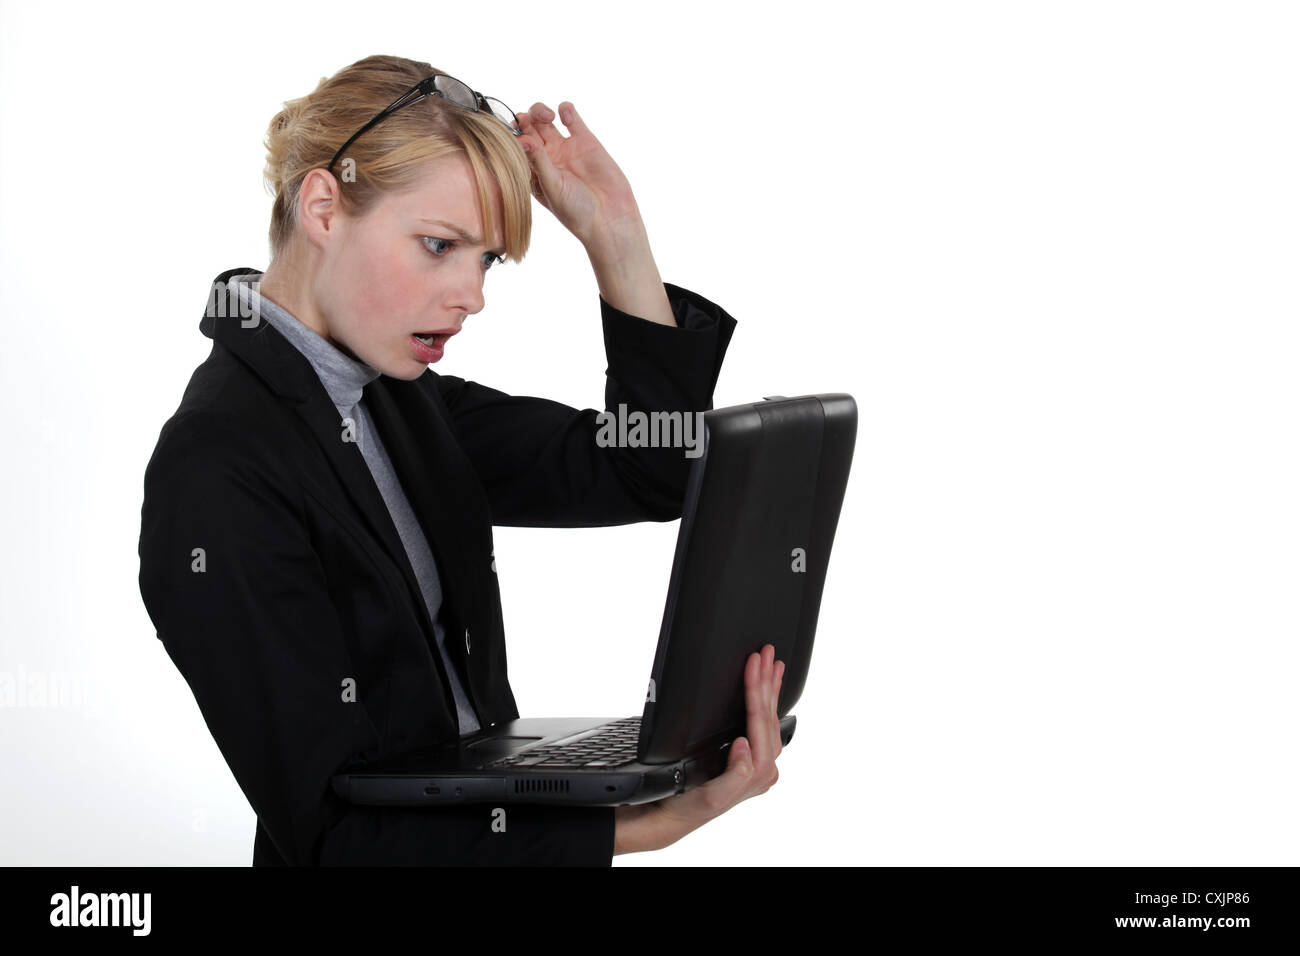 Woman caught in front of computer Stock Photo